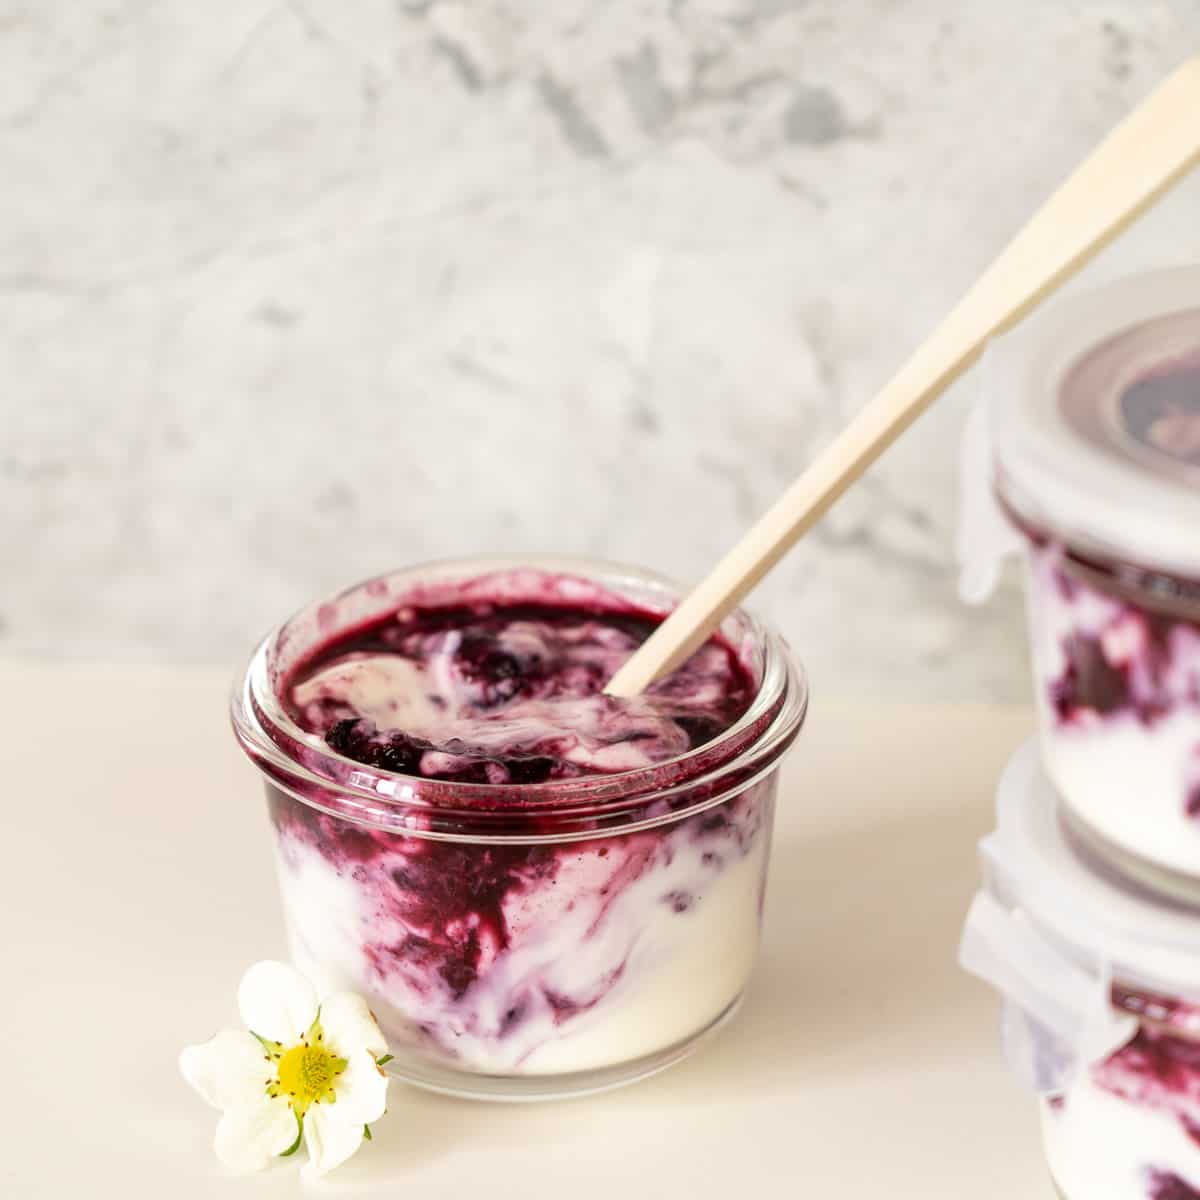 A glas jar of swirled blueberries and yogurt with a long handled bamboo spoon.